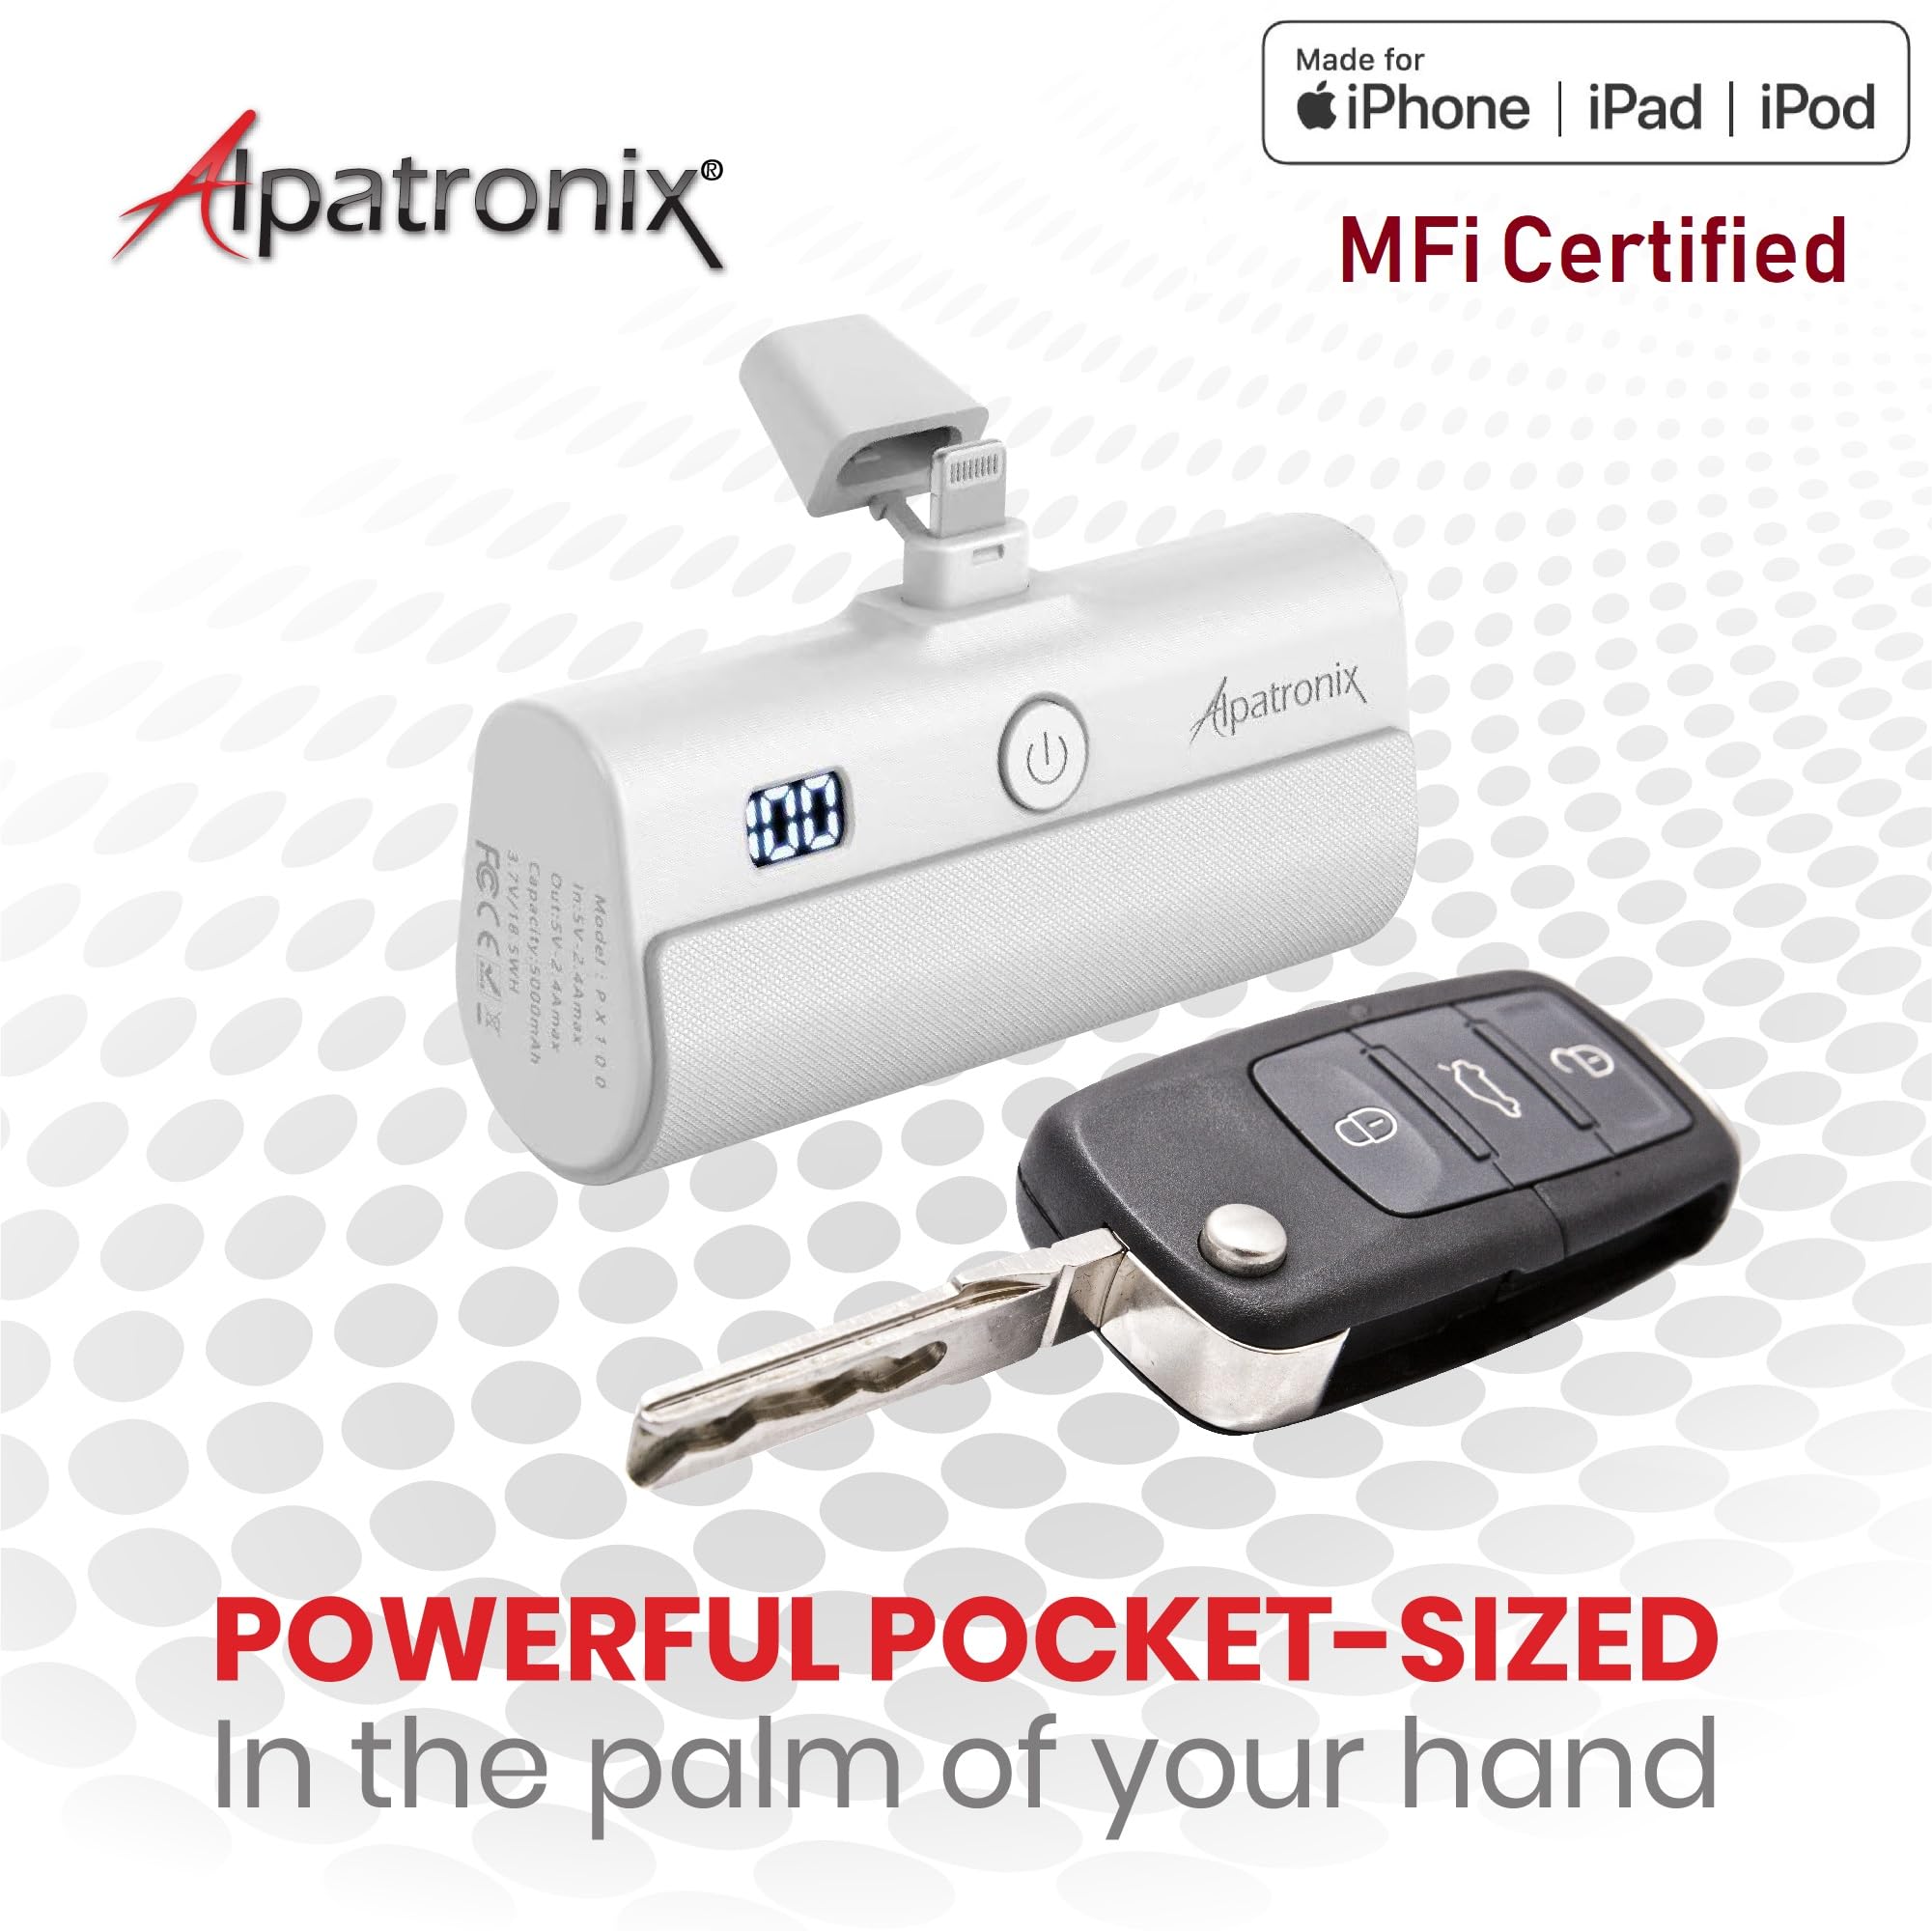 Alpatronix MFi Certified Mini Portable Charger for iPhone 5000mAh LCD Display Fast Charging Power Bank Compatible with All iPhones, AirPods, and iPads with Carrying Case - PX100 (White)